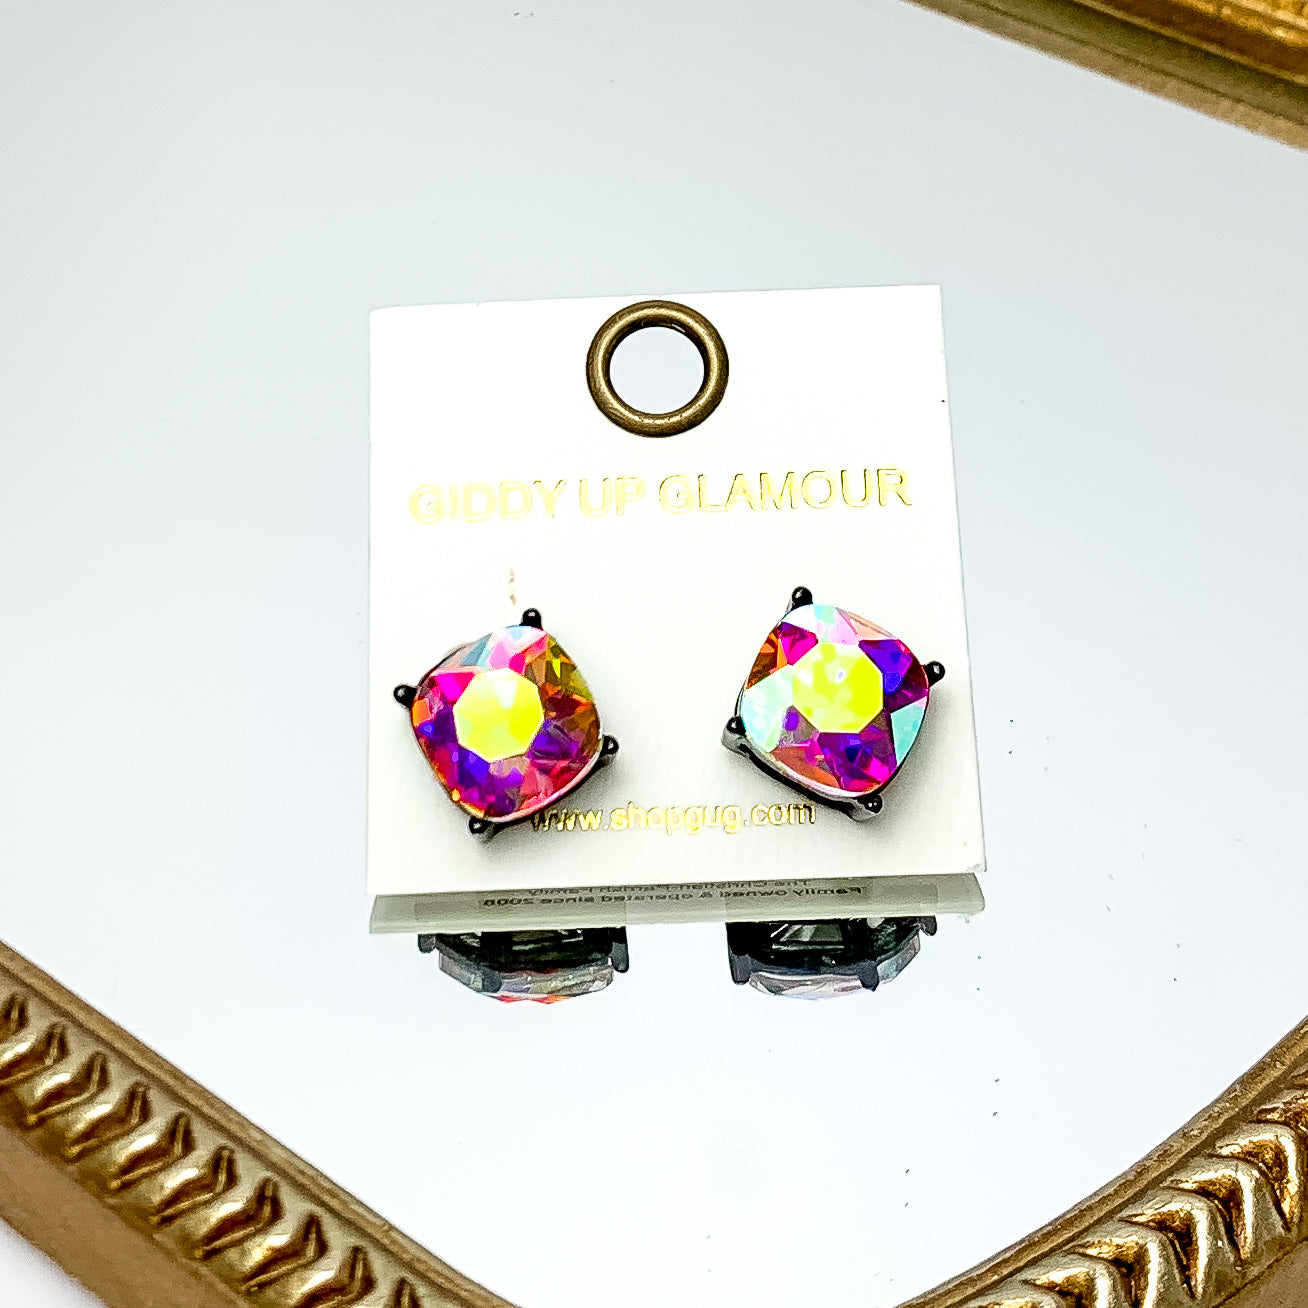 Large AB Crystal Stud Earrings in Black Setting. These earrings are pictured on a white background with a gold frame around.